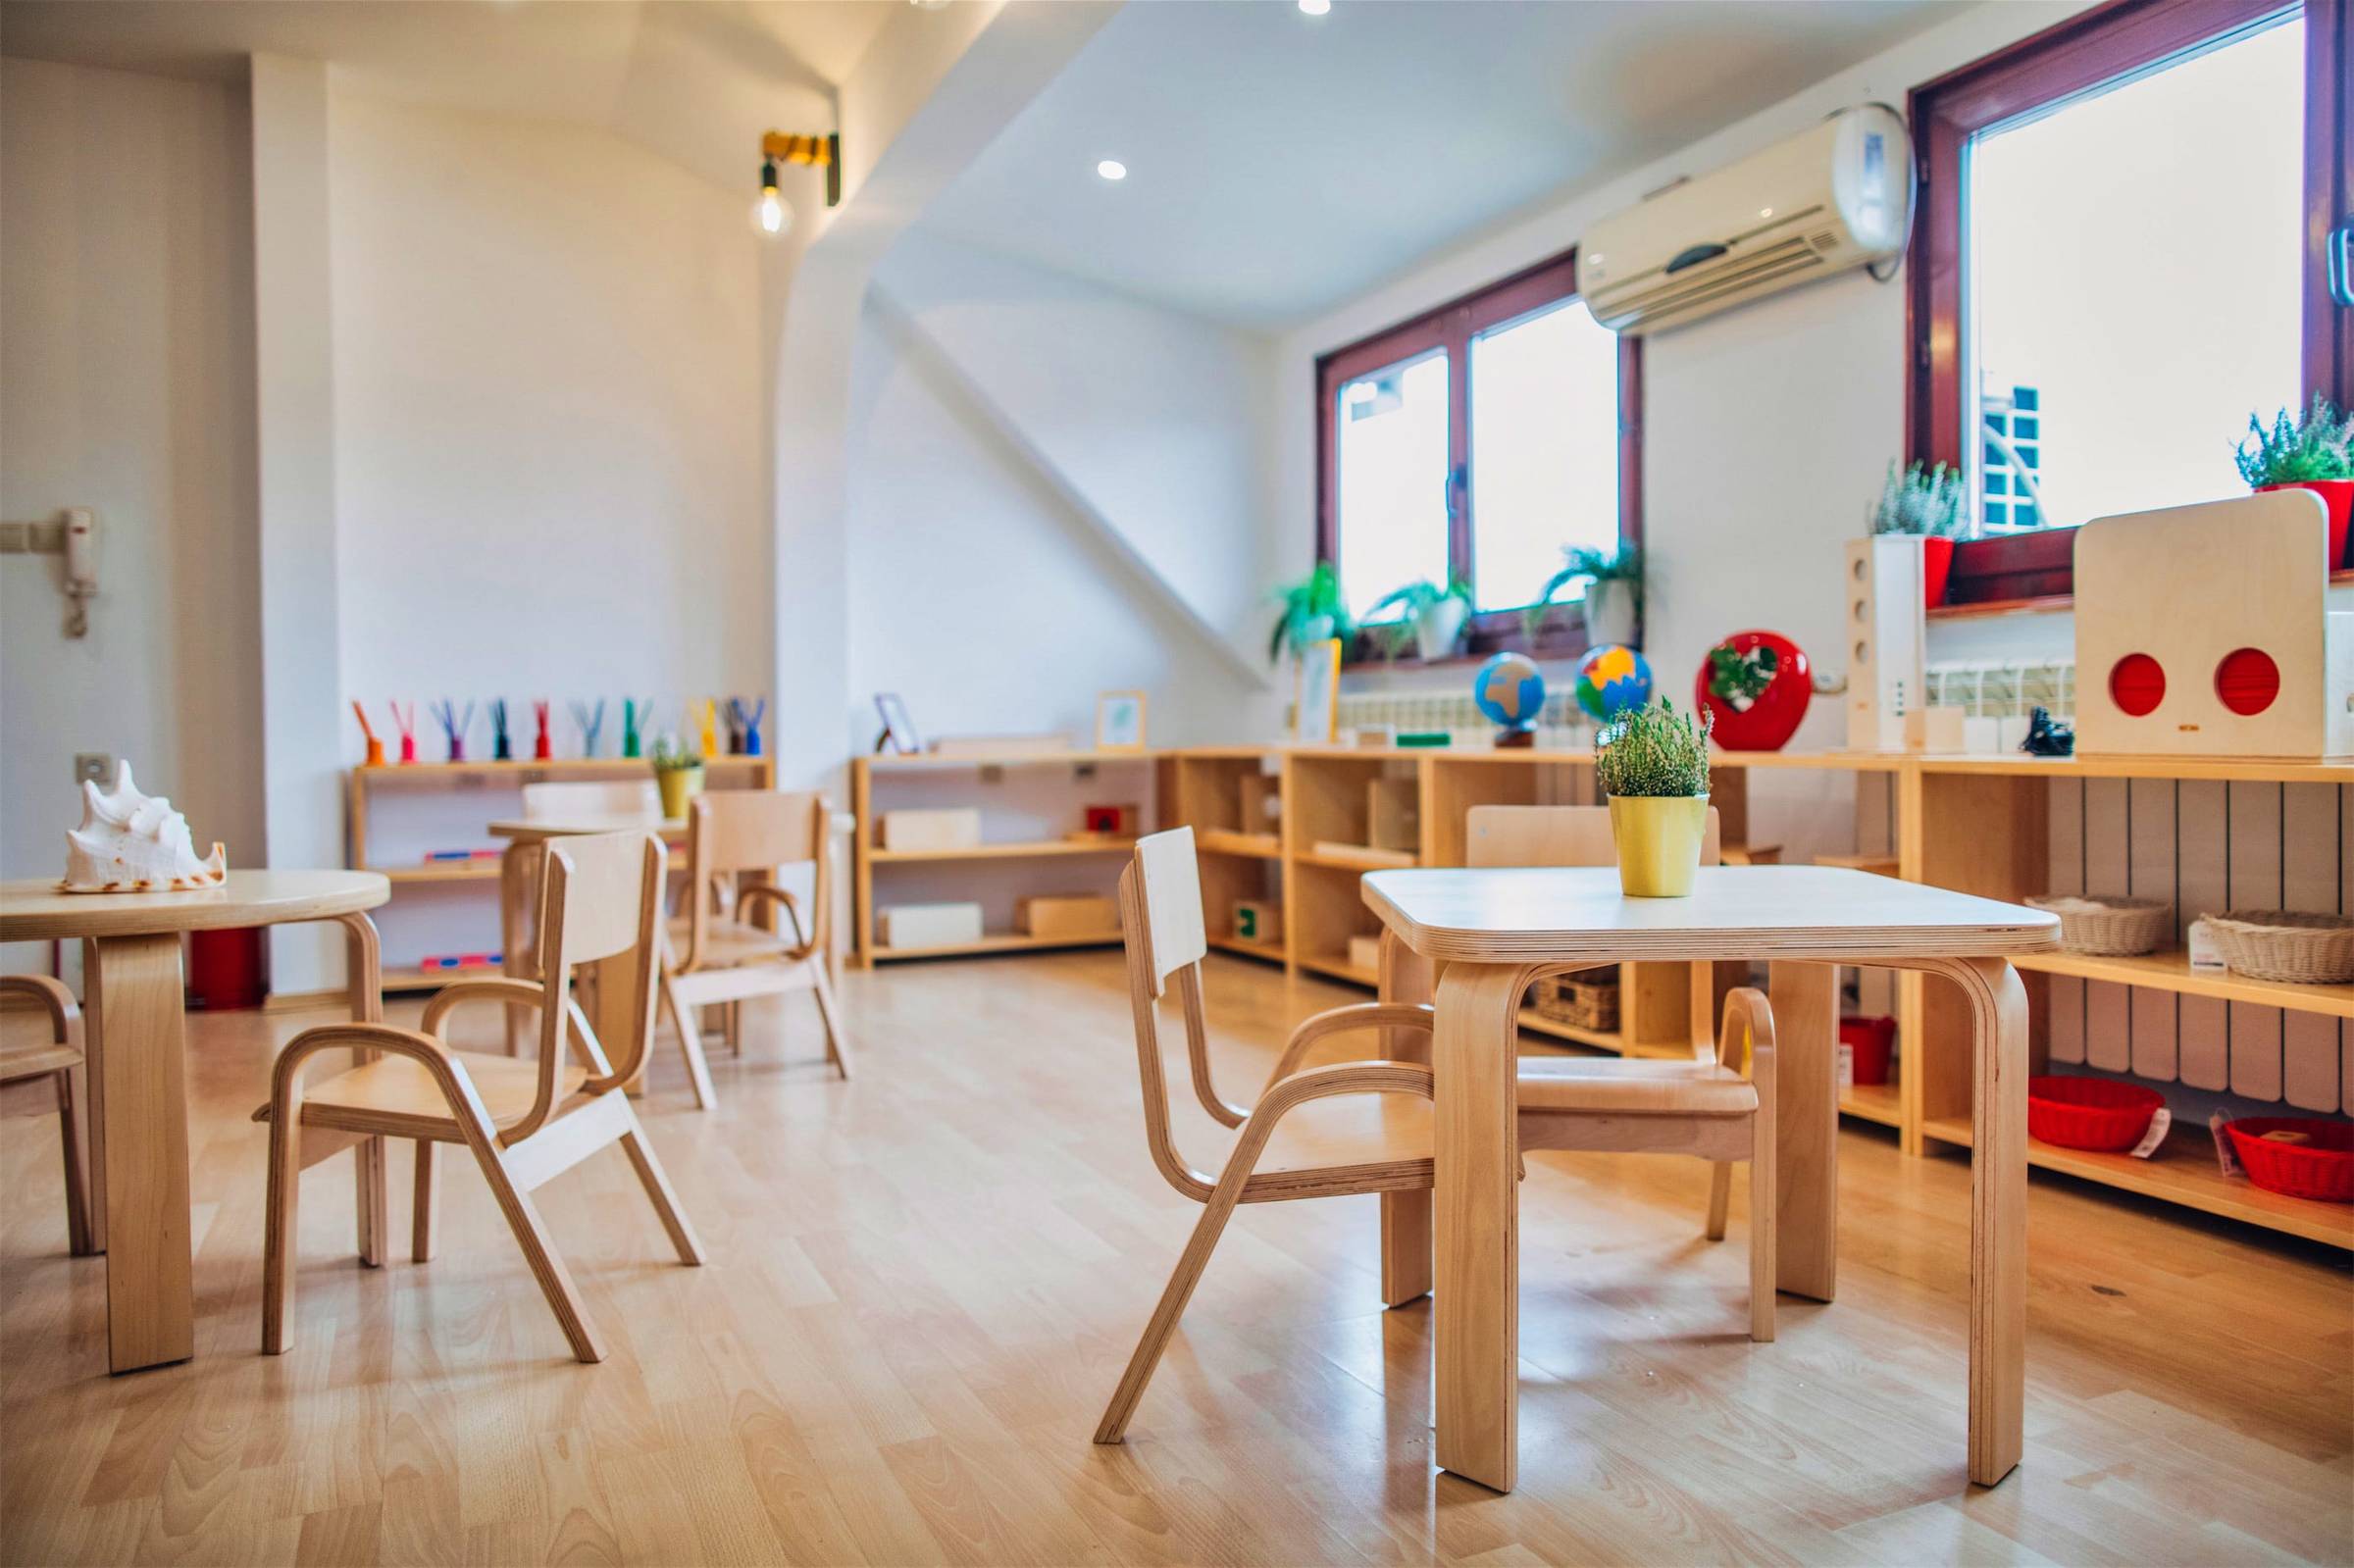 Daycare Center Pest Management in NYC